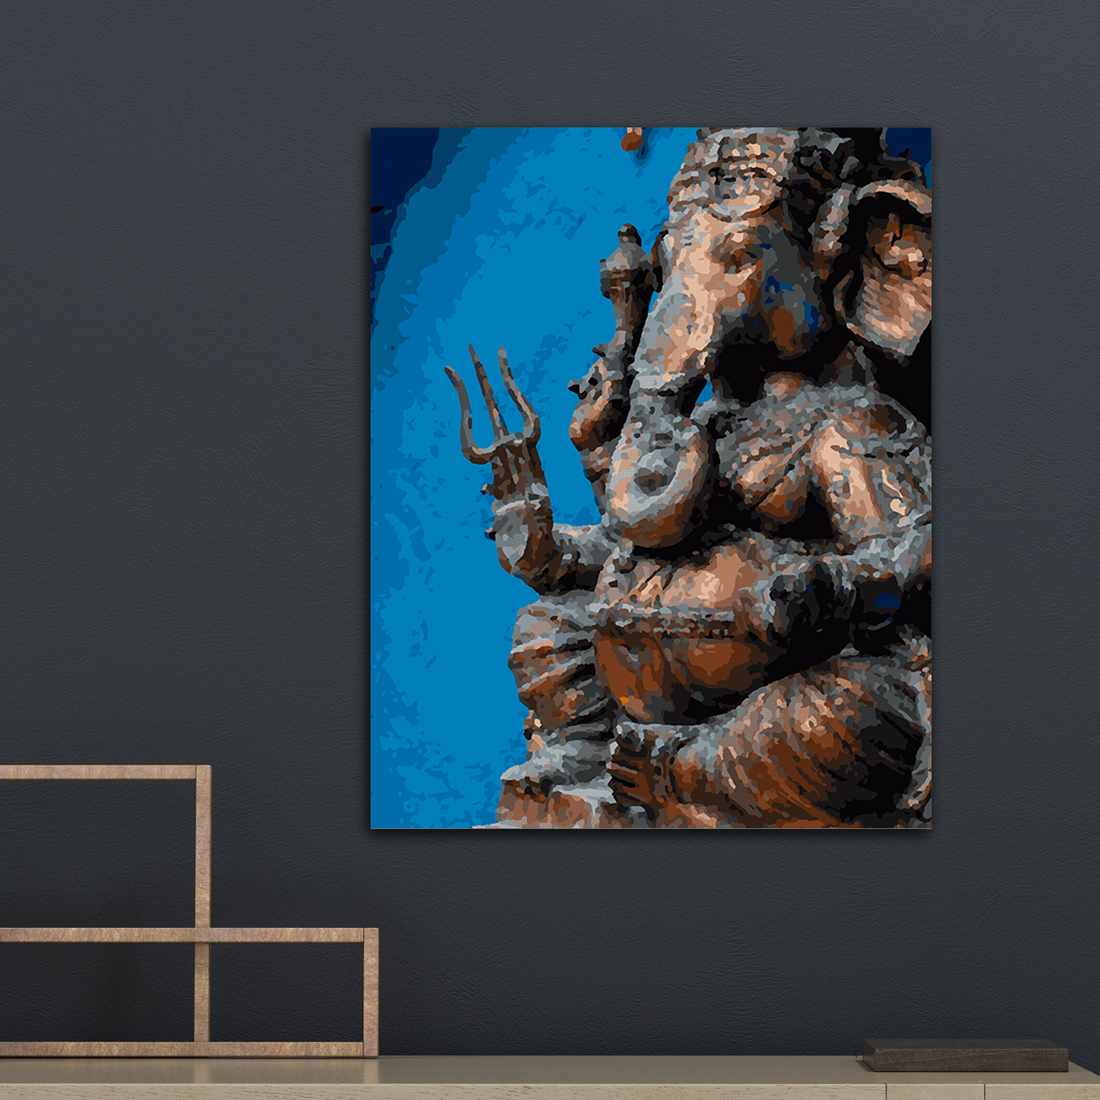 Ganesha Statue - Paint By Numbers Kit